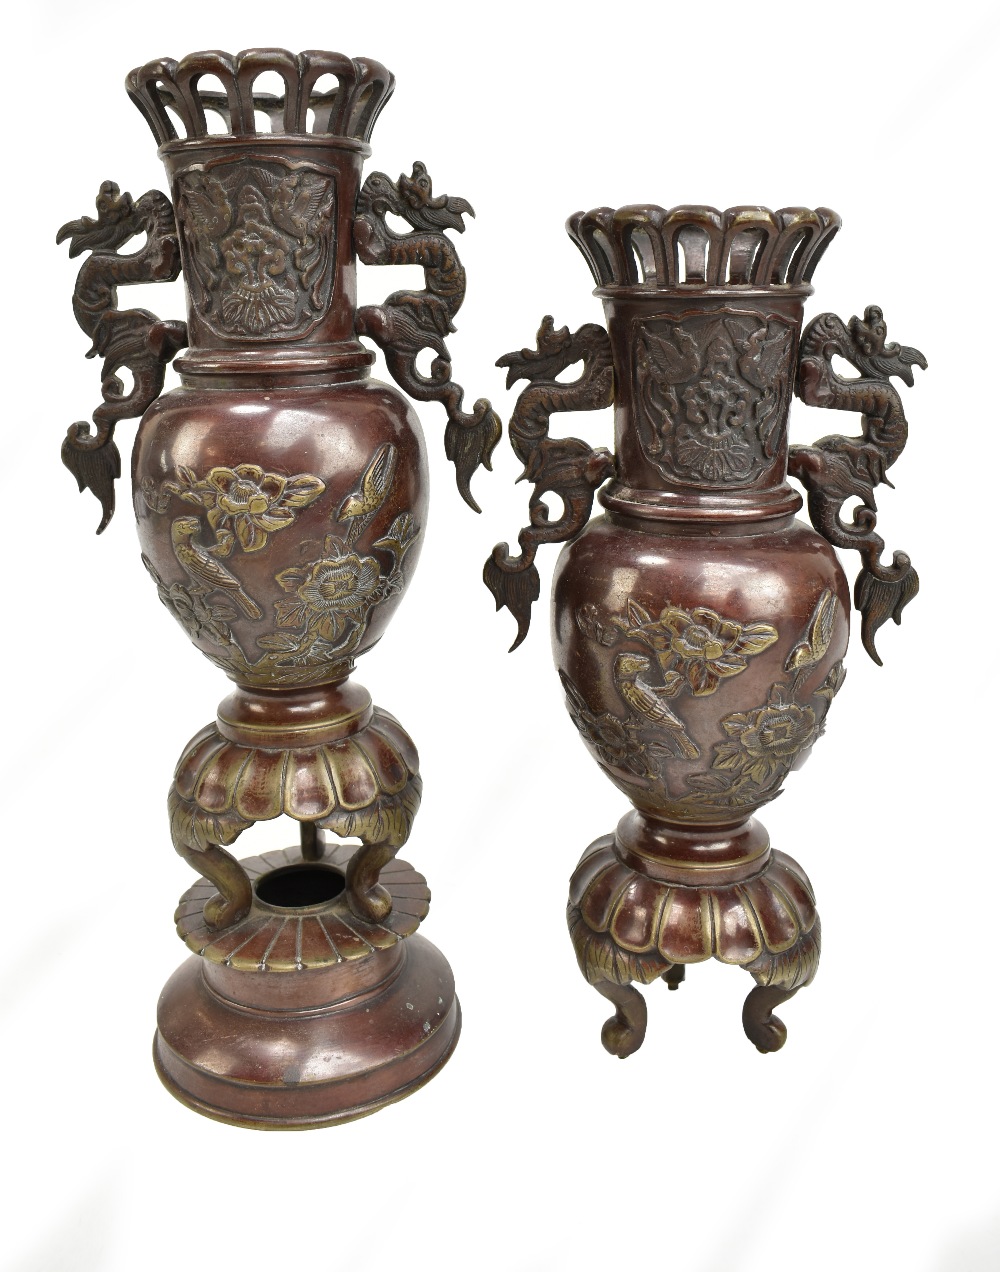 A pair of late 19th/early 20th century Japanese patinated bronze vases with cast twin dragon